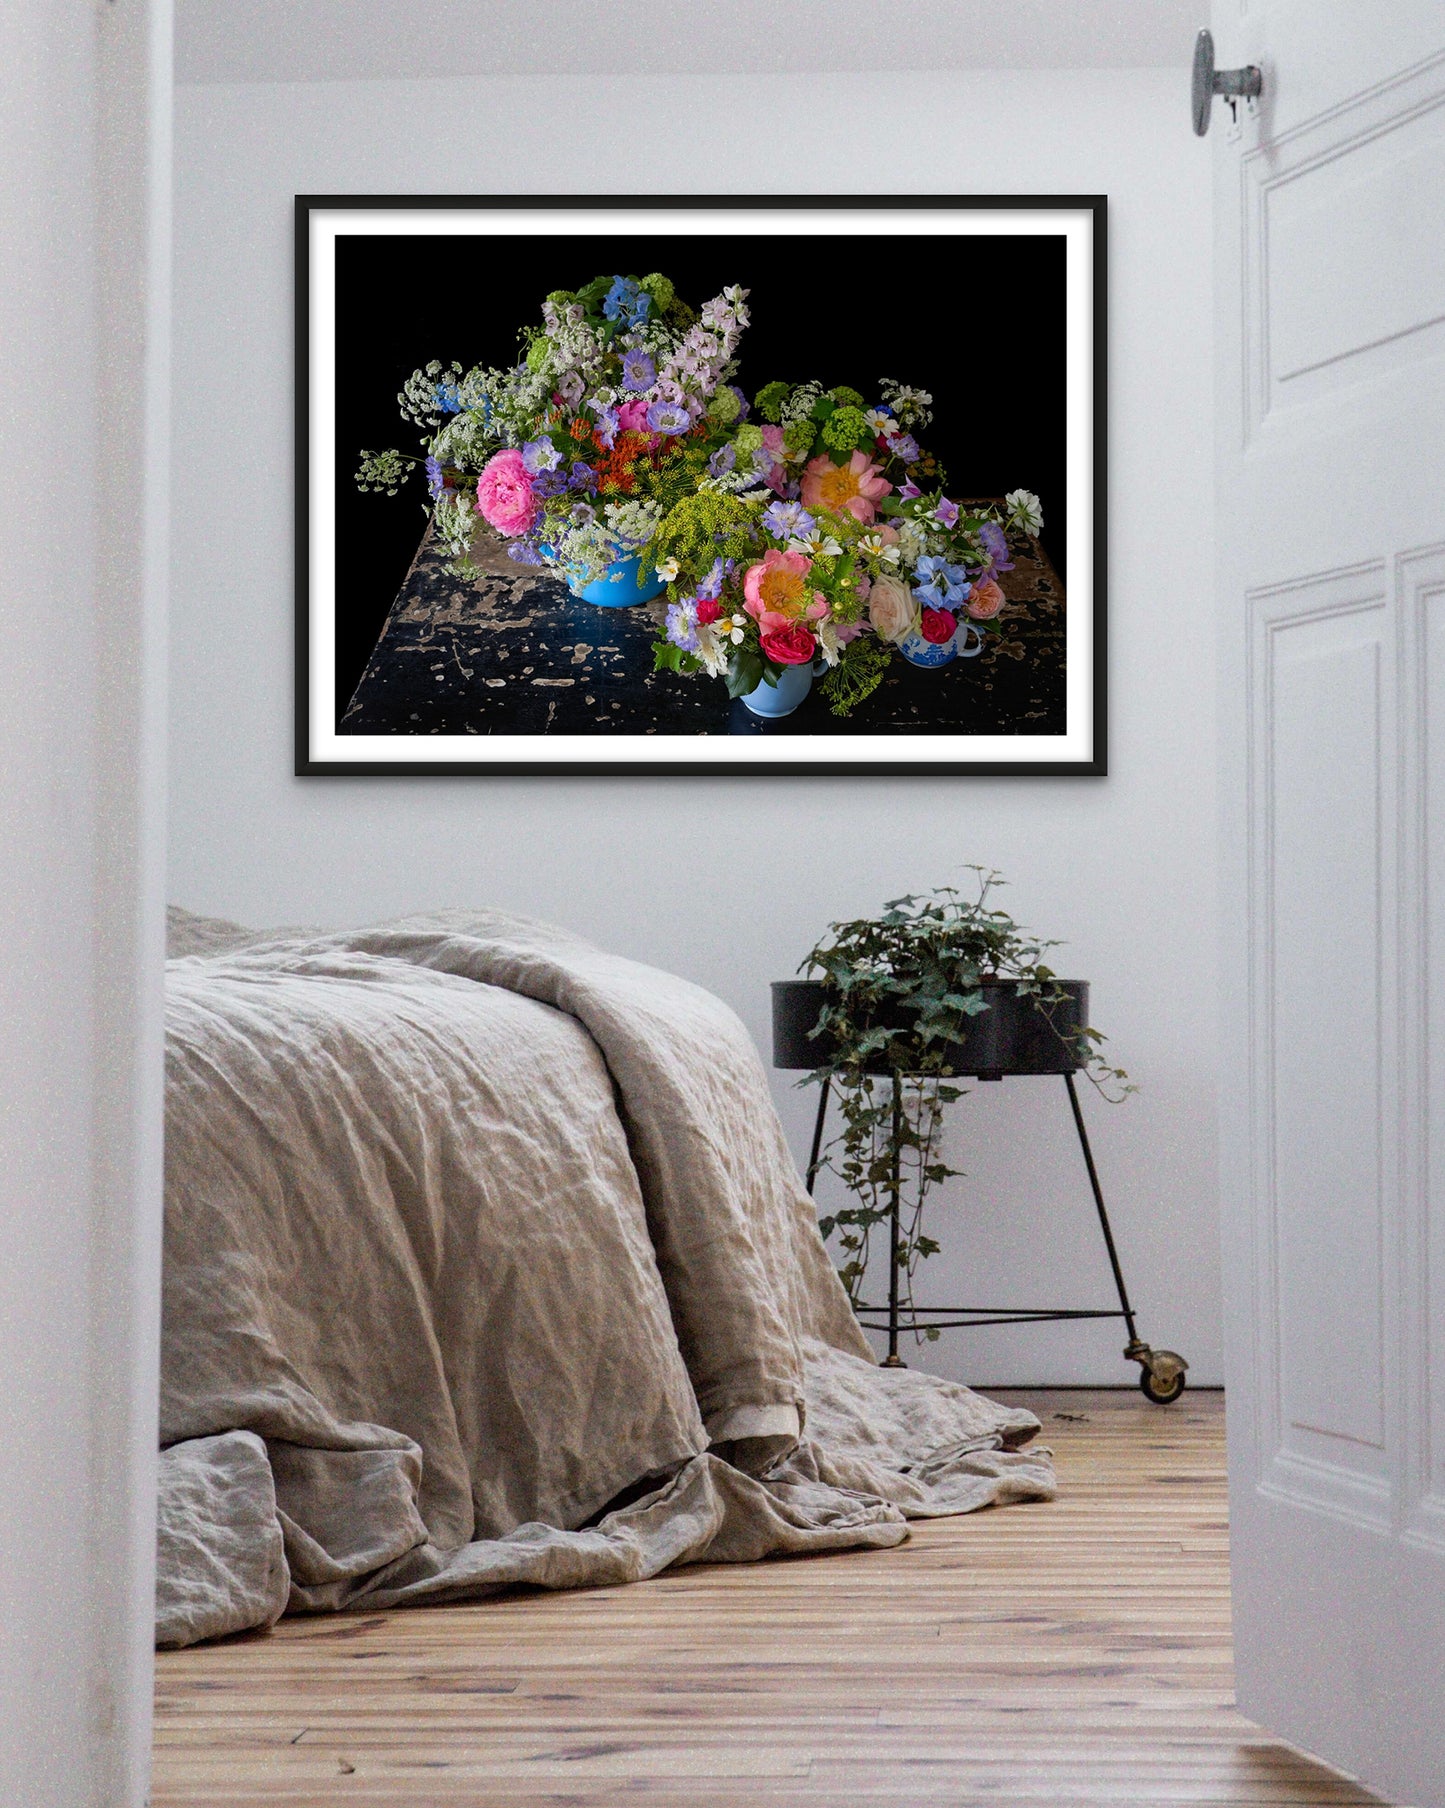 'BETSY' Extra Large Framed Photographic Flower Print Displayed in a Relaxed Bedroom.